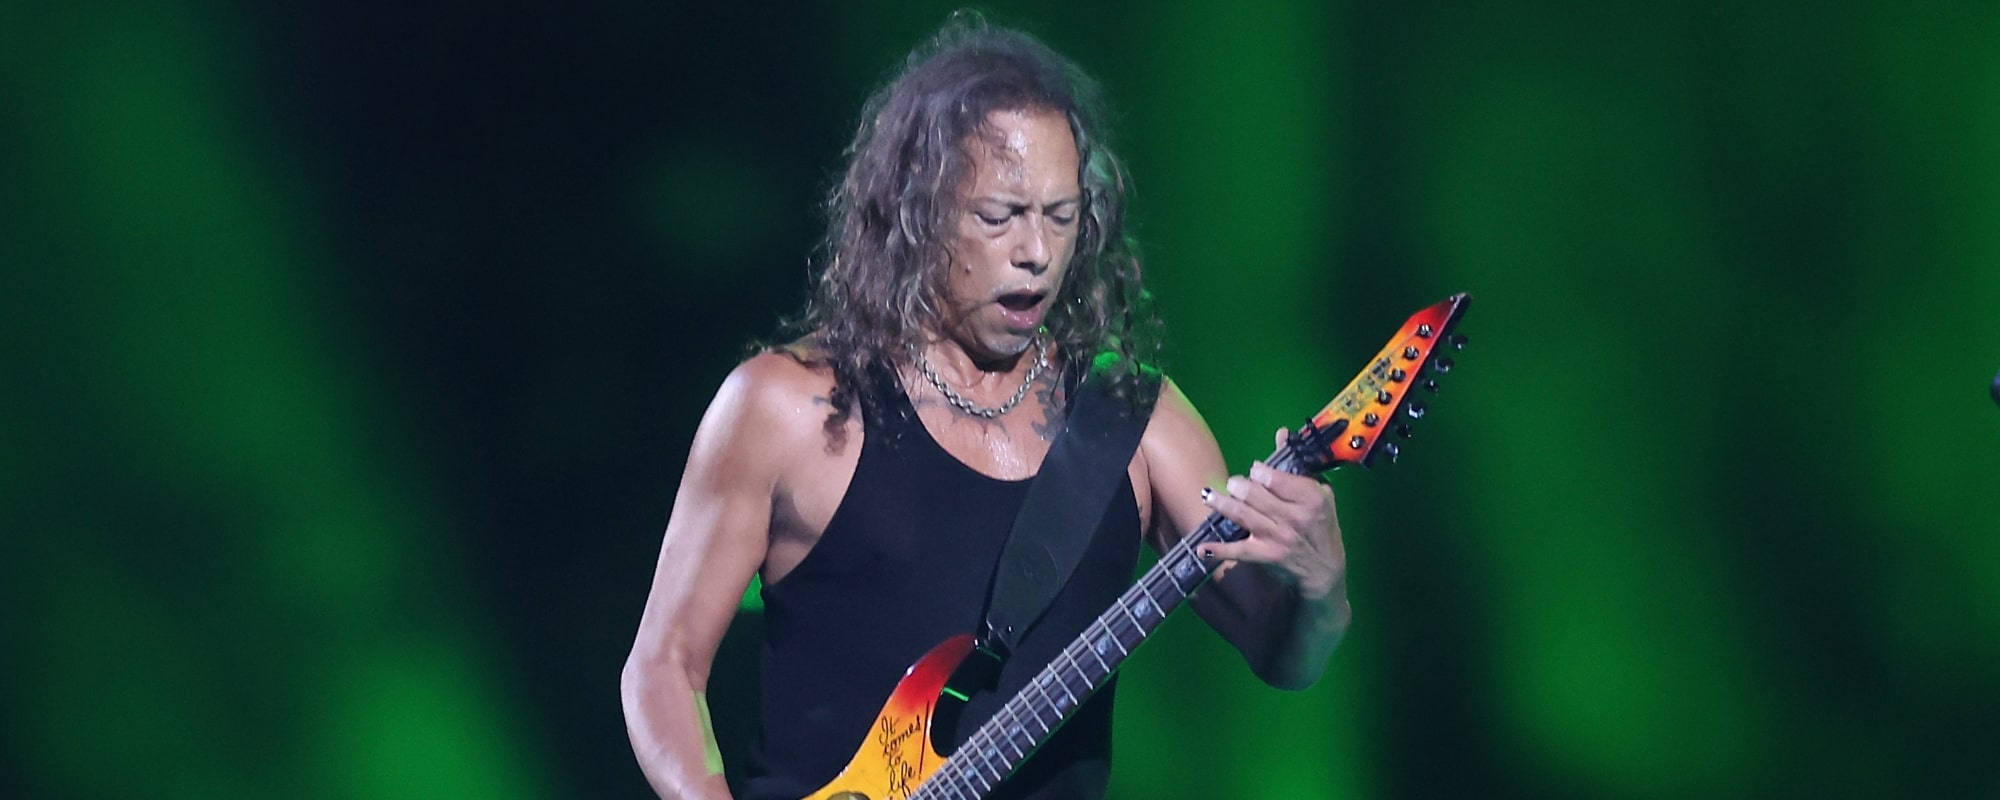 Angel Vivaldi Accuses Metallica’s Kirk Hammett of Being “A Reason Why Guitar Solos Are Dying”